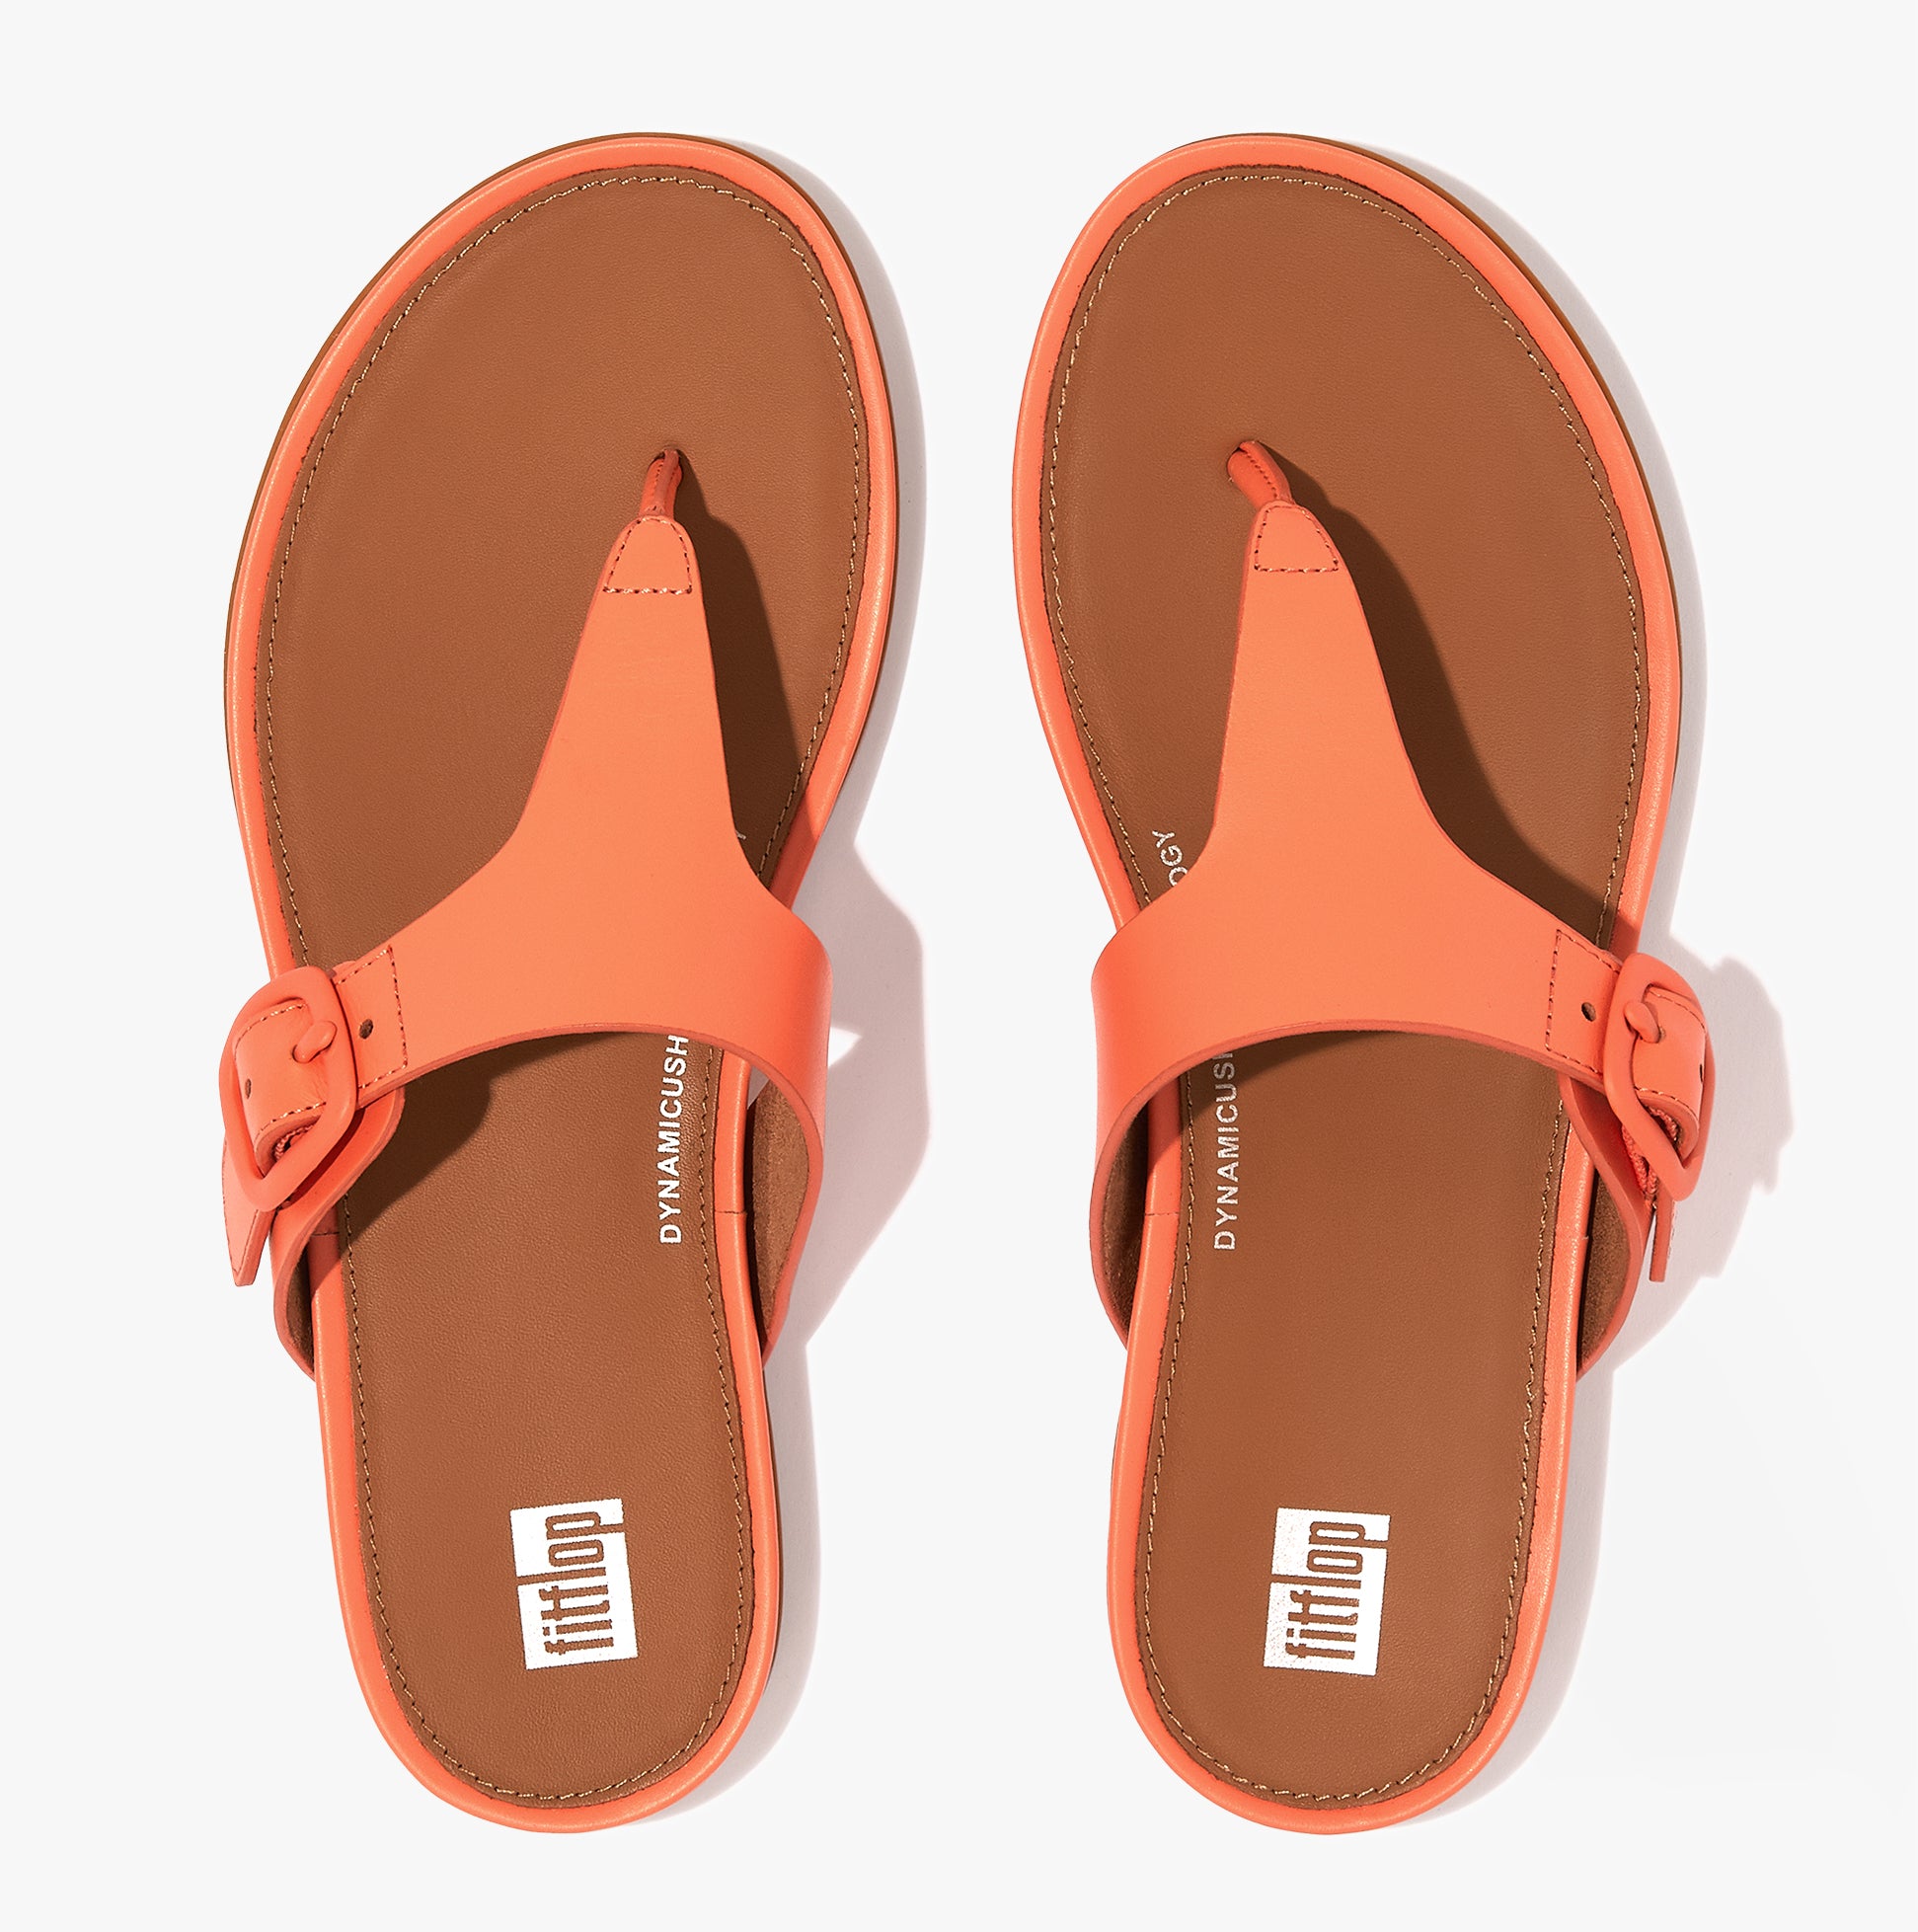 FitFlop-[FT9-580]-SunshineCoral-5.jpg